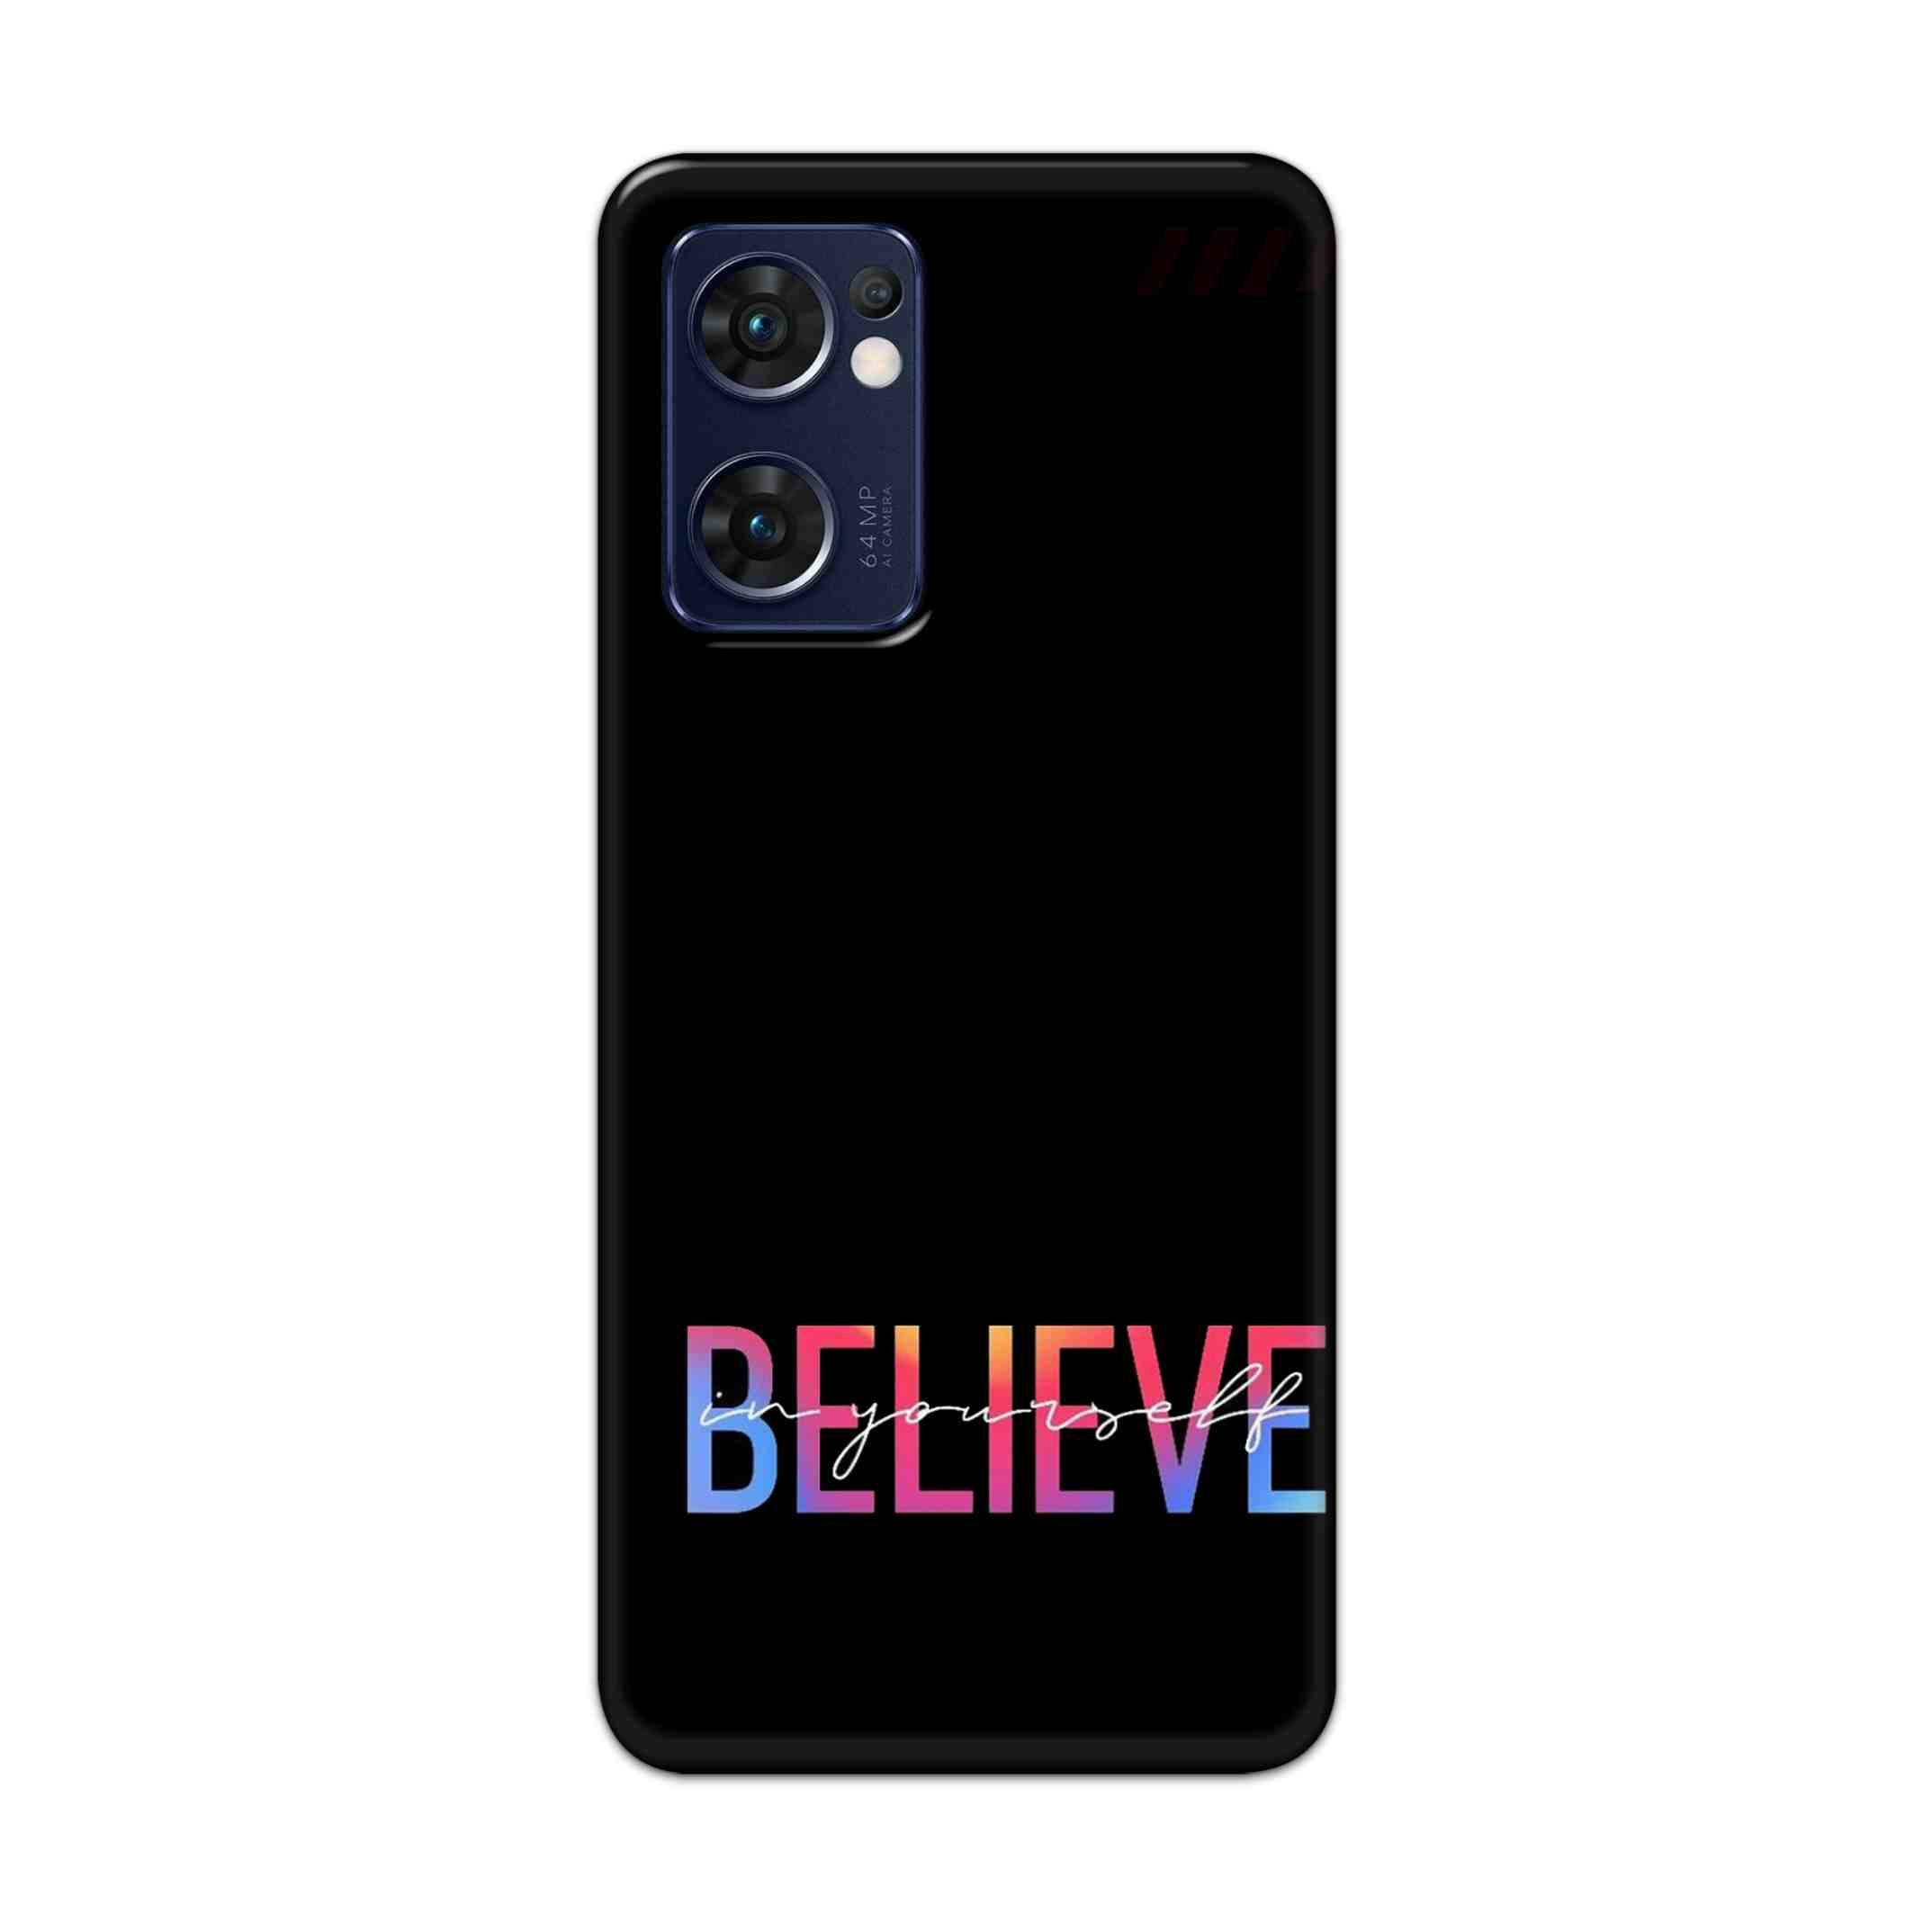 Buy Believe Hard Back Mobile Phone Case Cover For Reno 7 5G Online